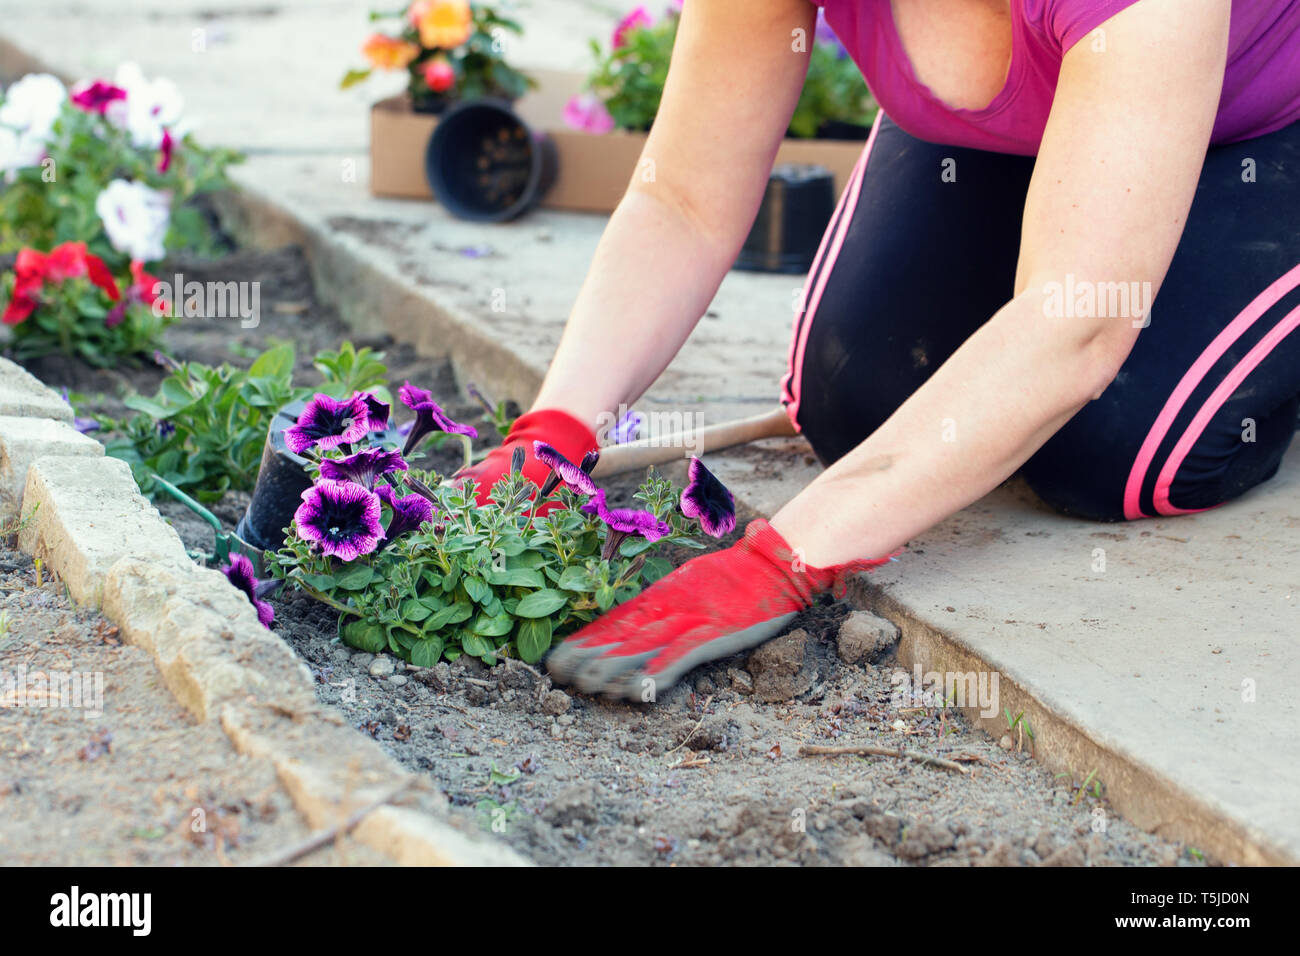 Woman hands planting flowers into soil outdoors Stock Photo